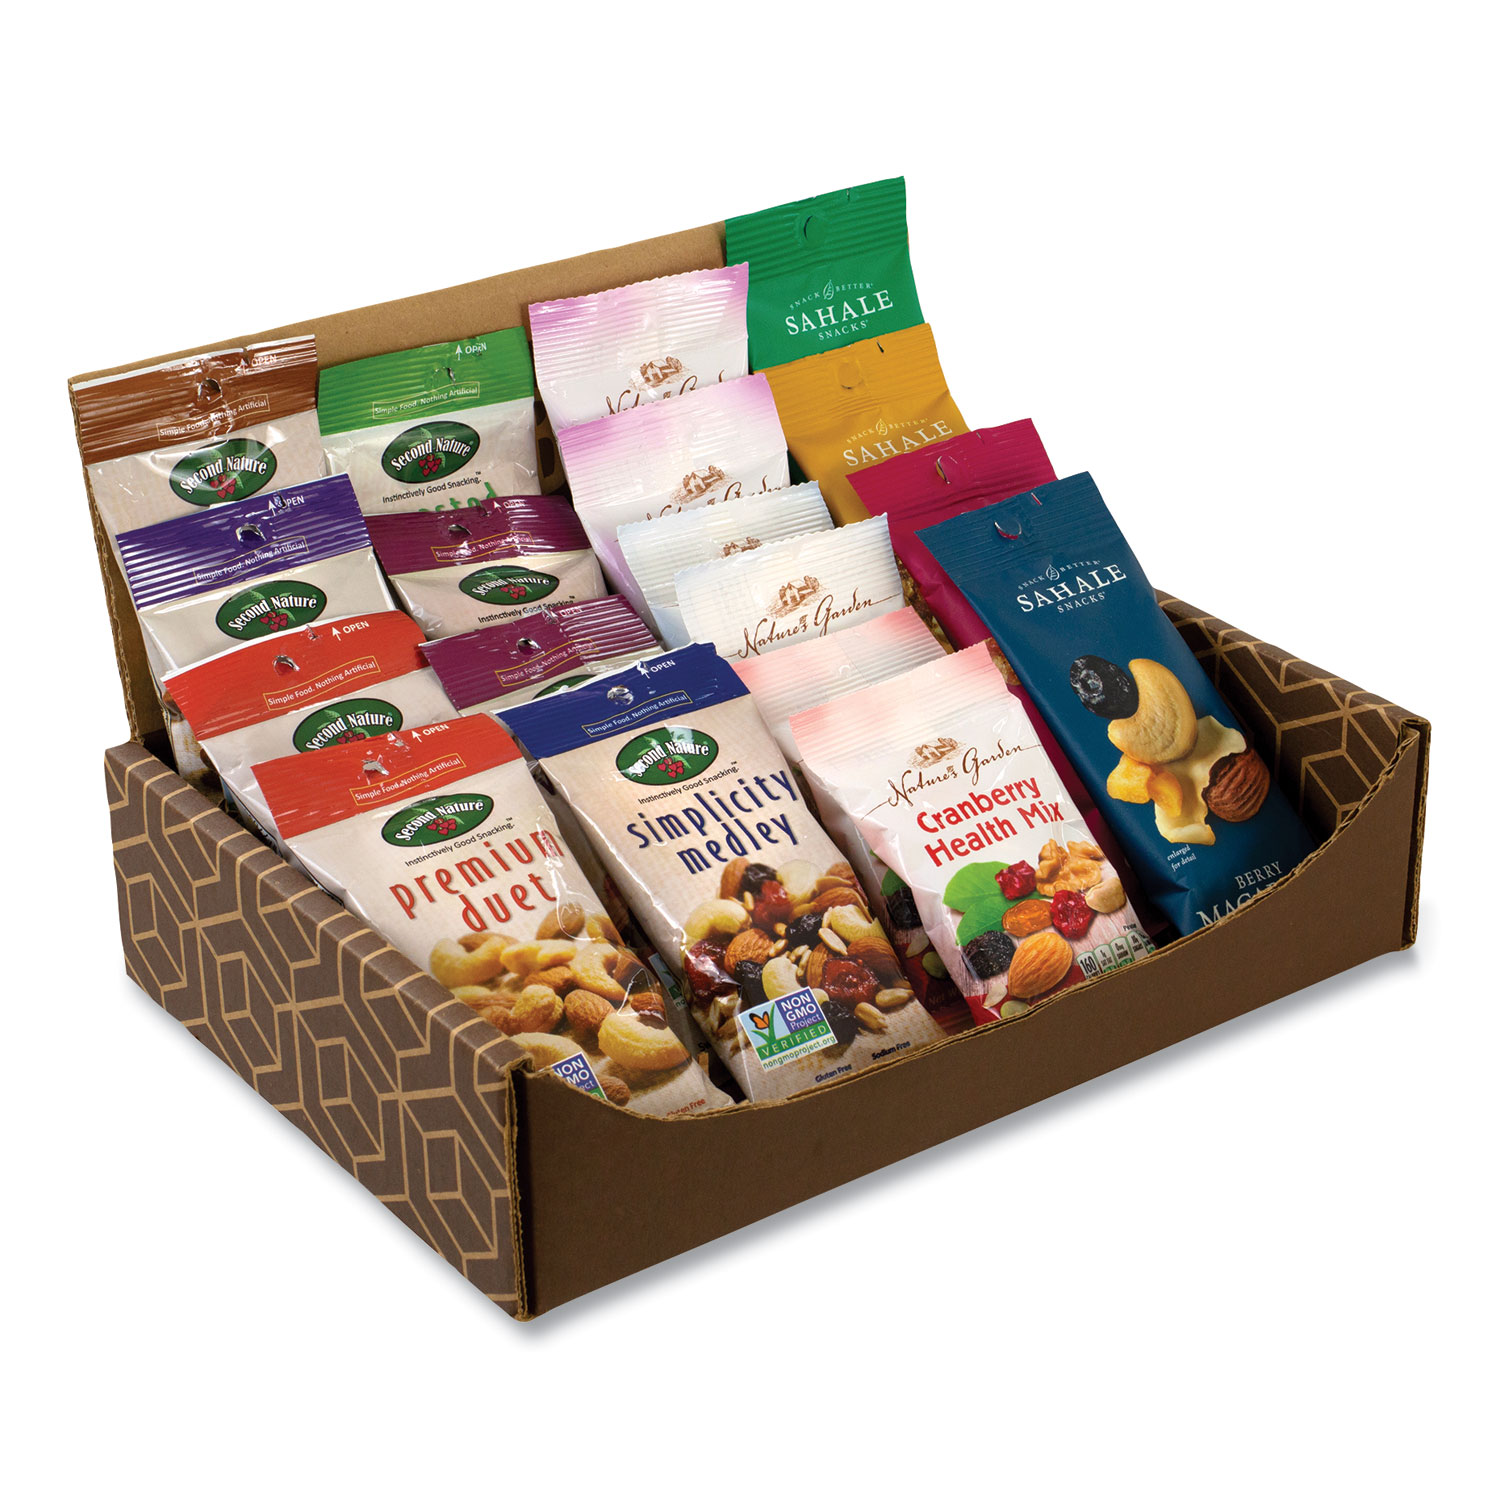 Snack Box Pros Healthy Mixed Nuts Snack Box, 18 Assorted Snacks, Free Delivery in 1-4 Business Days